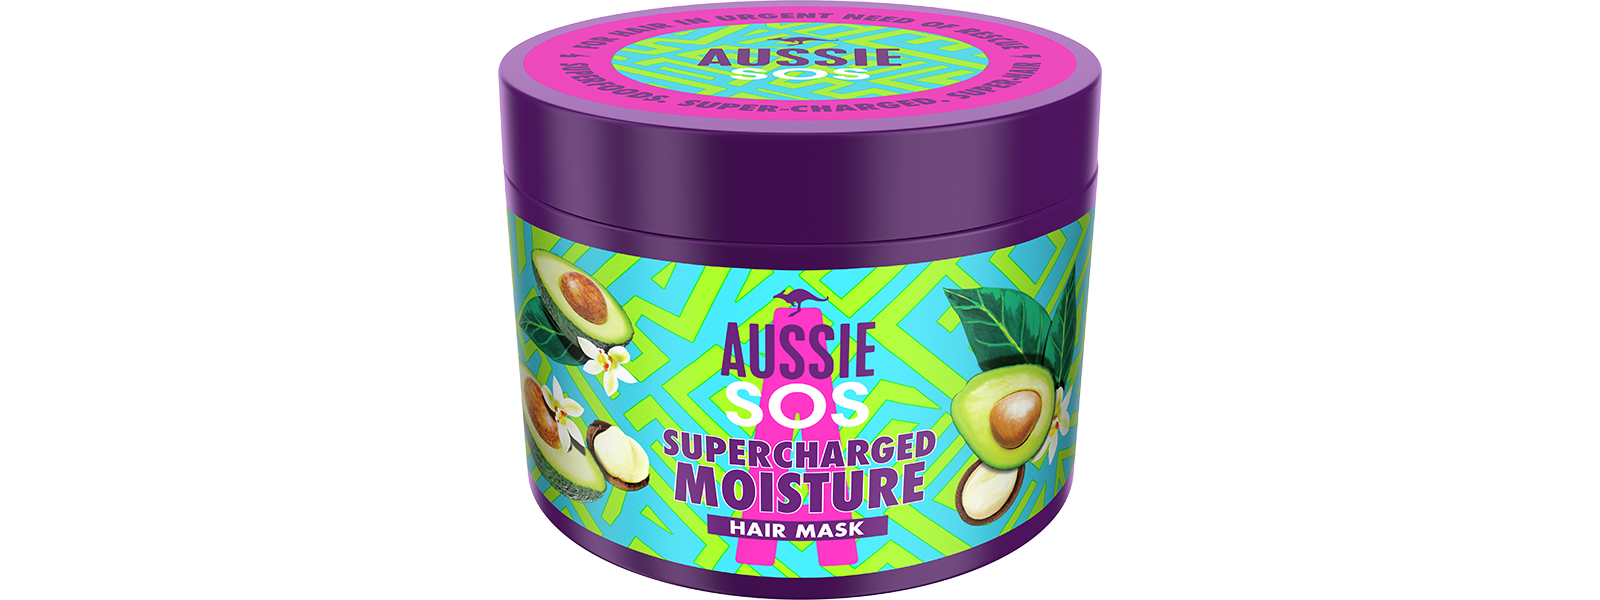 An image of Aussie SOS Supercharged Moisture Hair Mask bottle